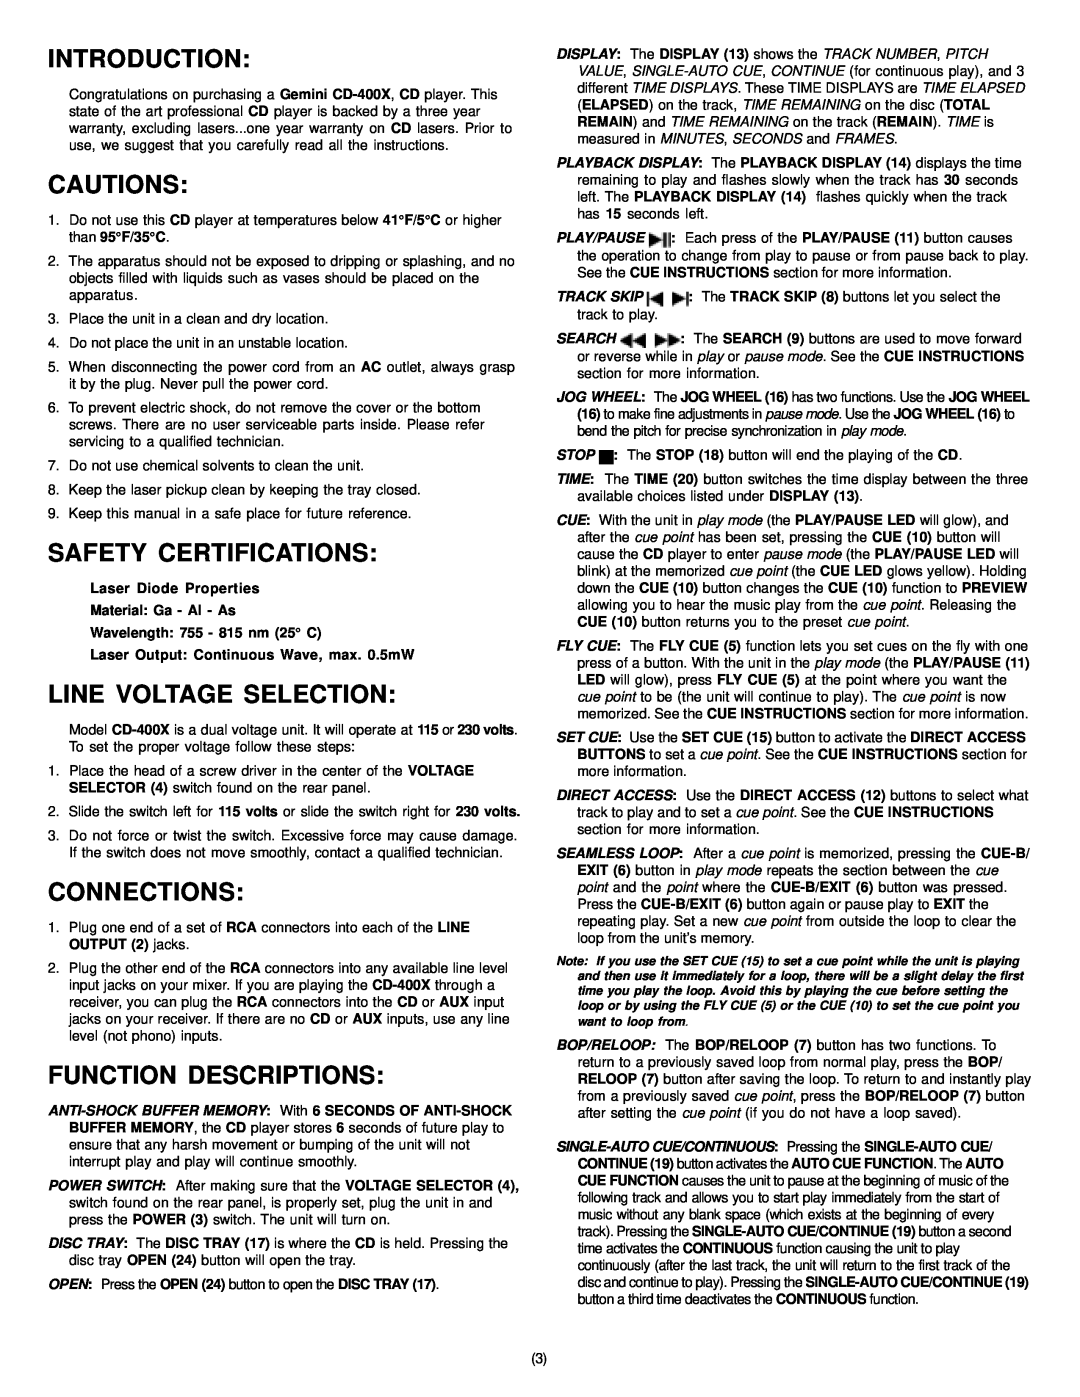 Gemini CD-400X Introduction, Cautions, Safety Certifications, Line Voltage Selection, Connections, Function Descriptions 